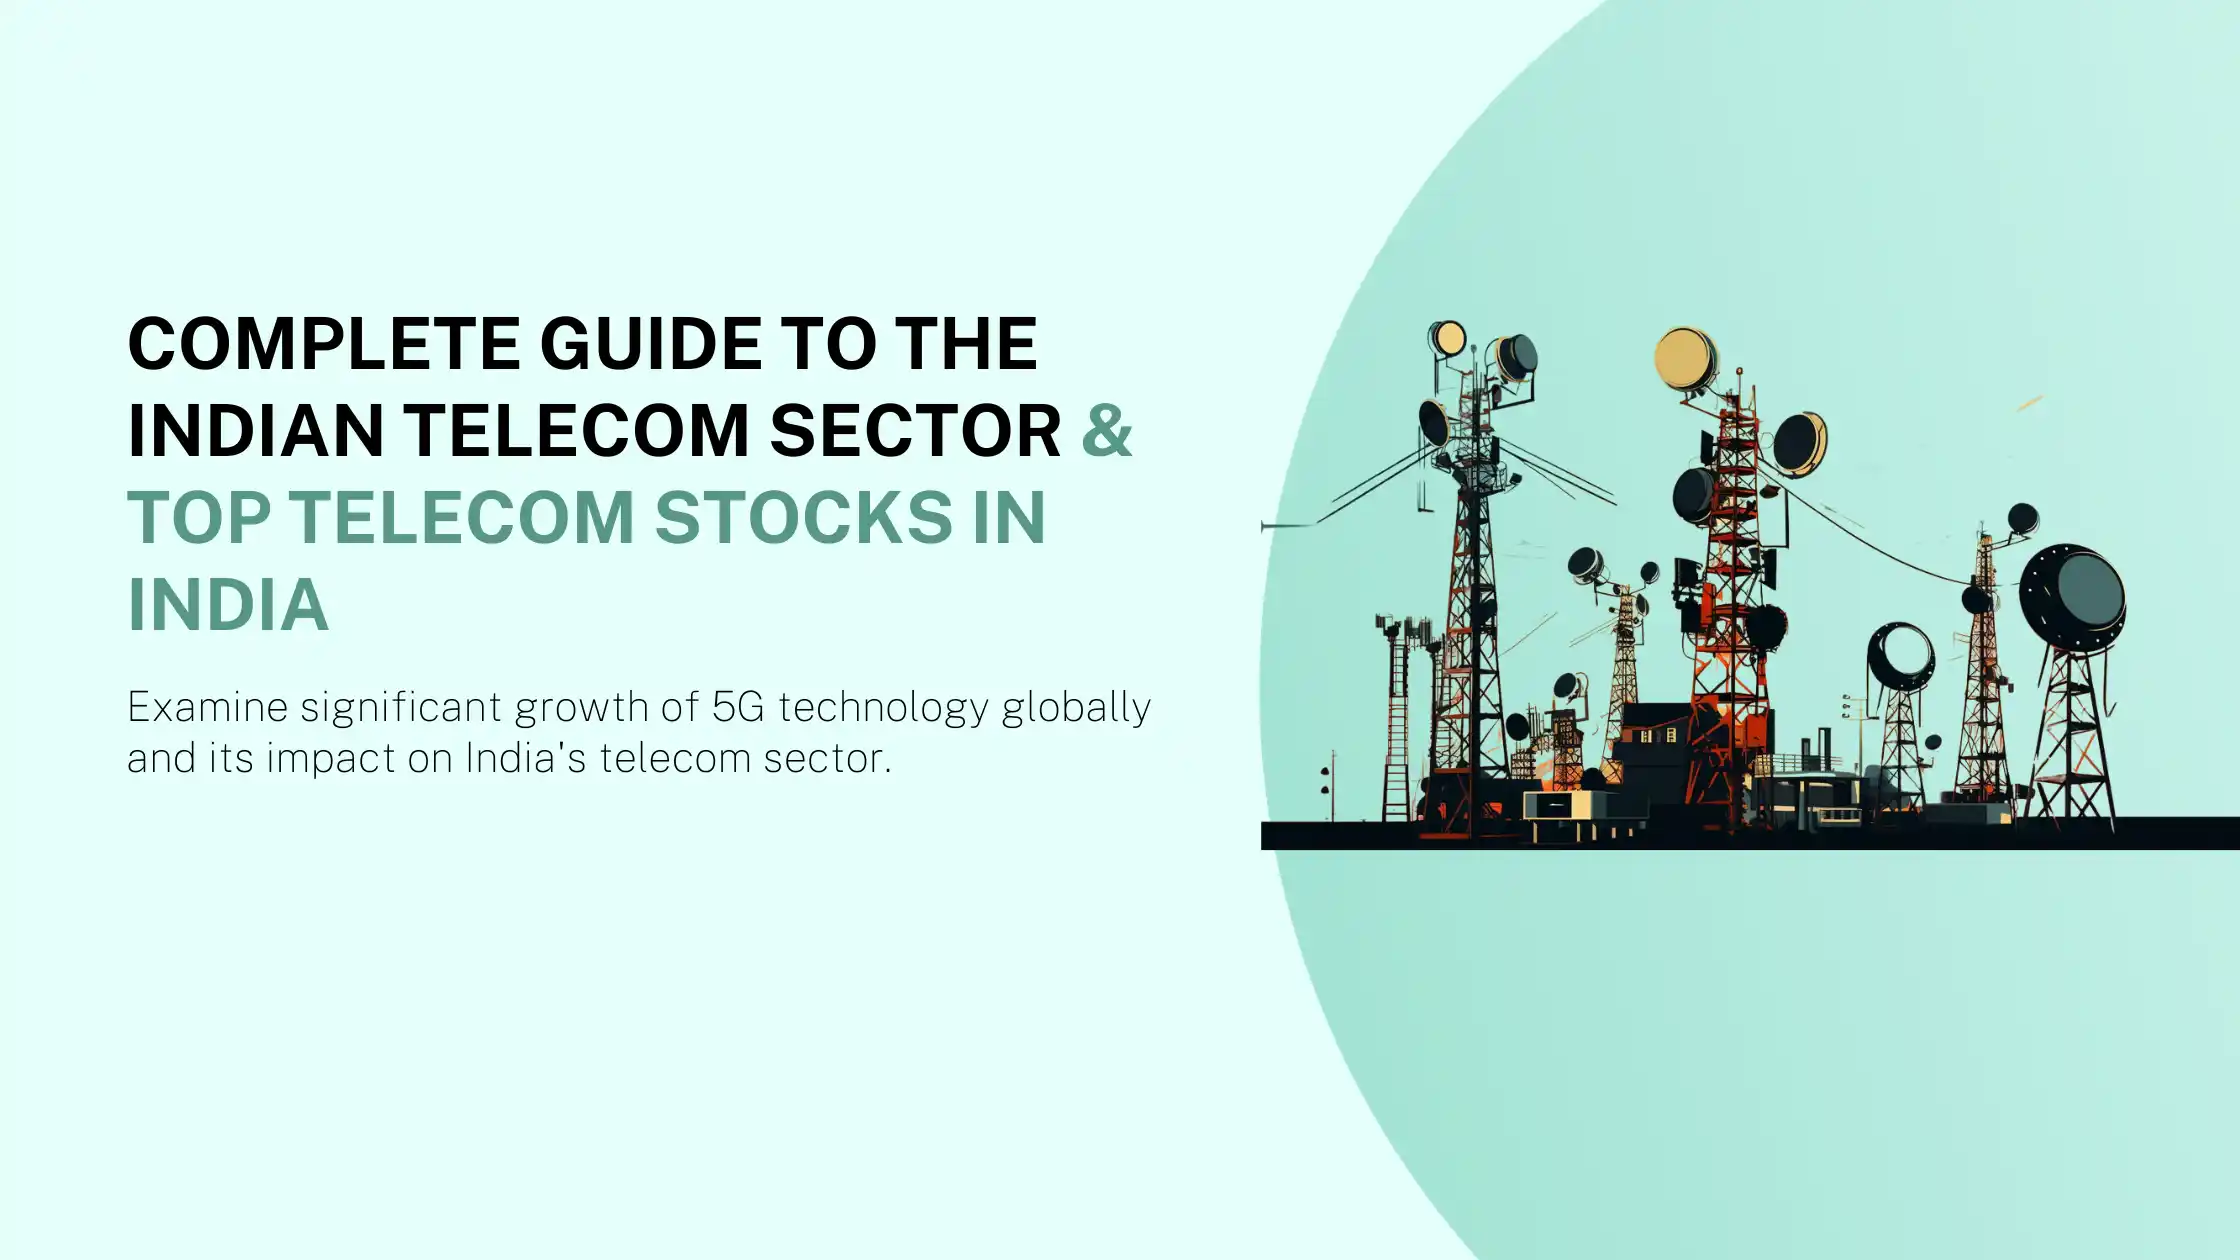 Complete Guide to the Indian Telecom Sector and Top Telecom Stocks in India